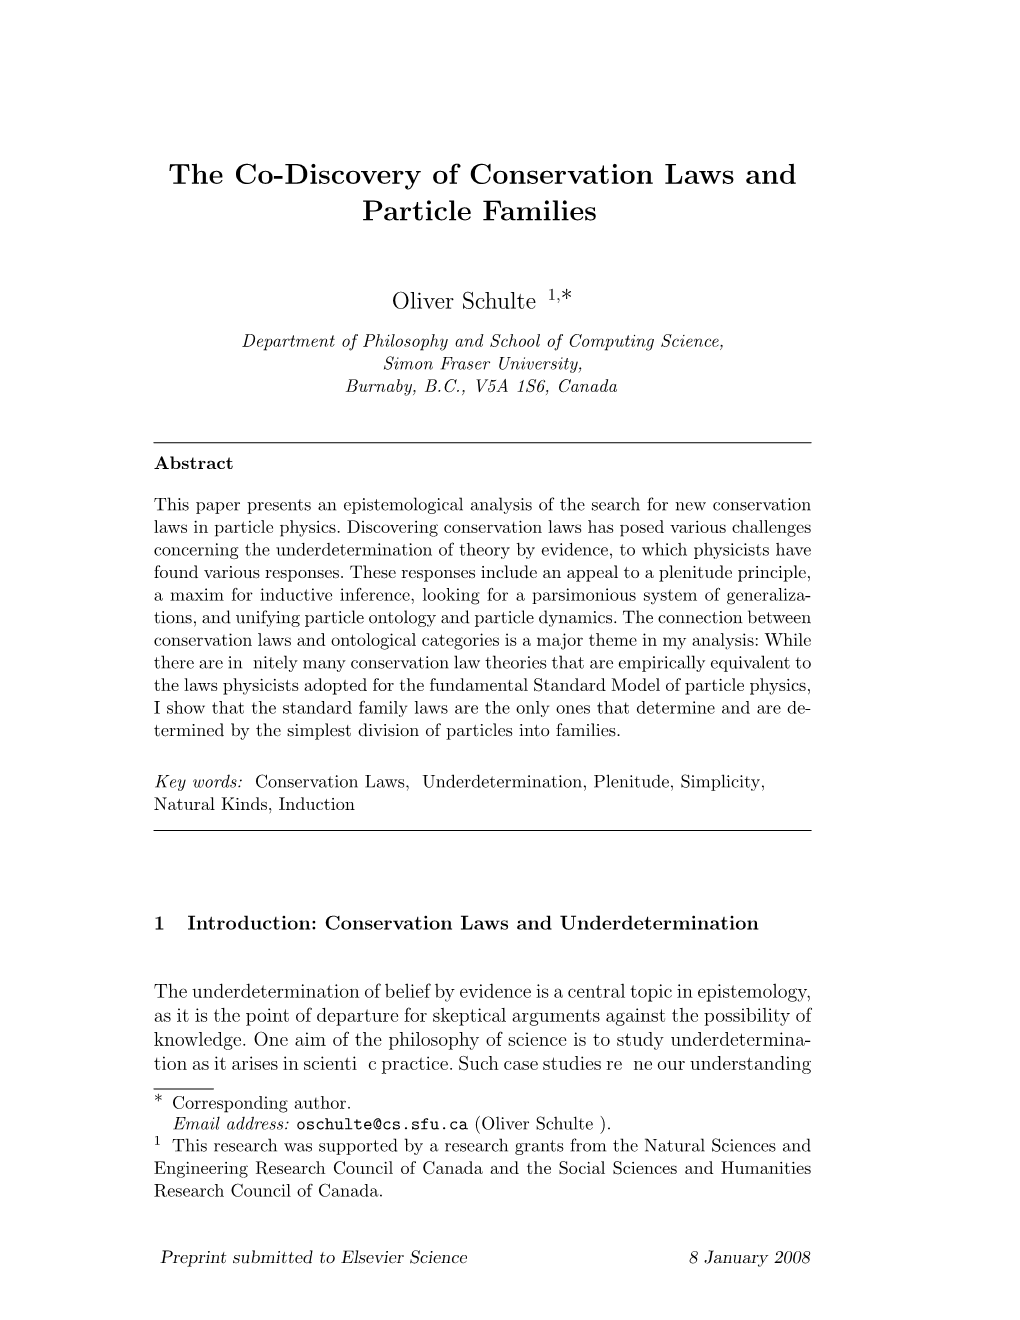 The Co-Discovery of Conservation Laws and Particle Families